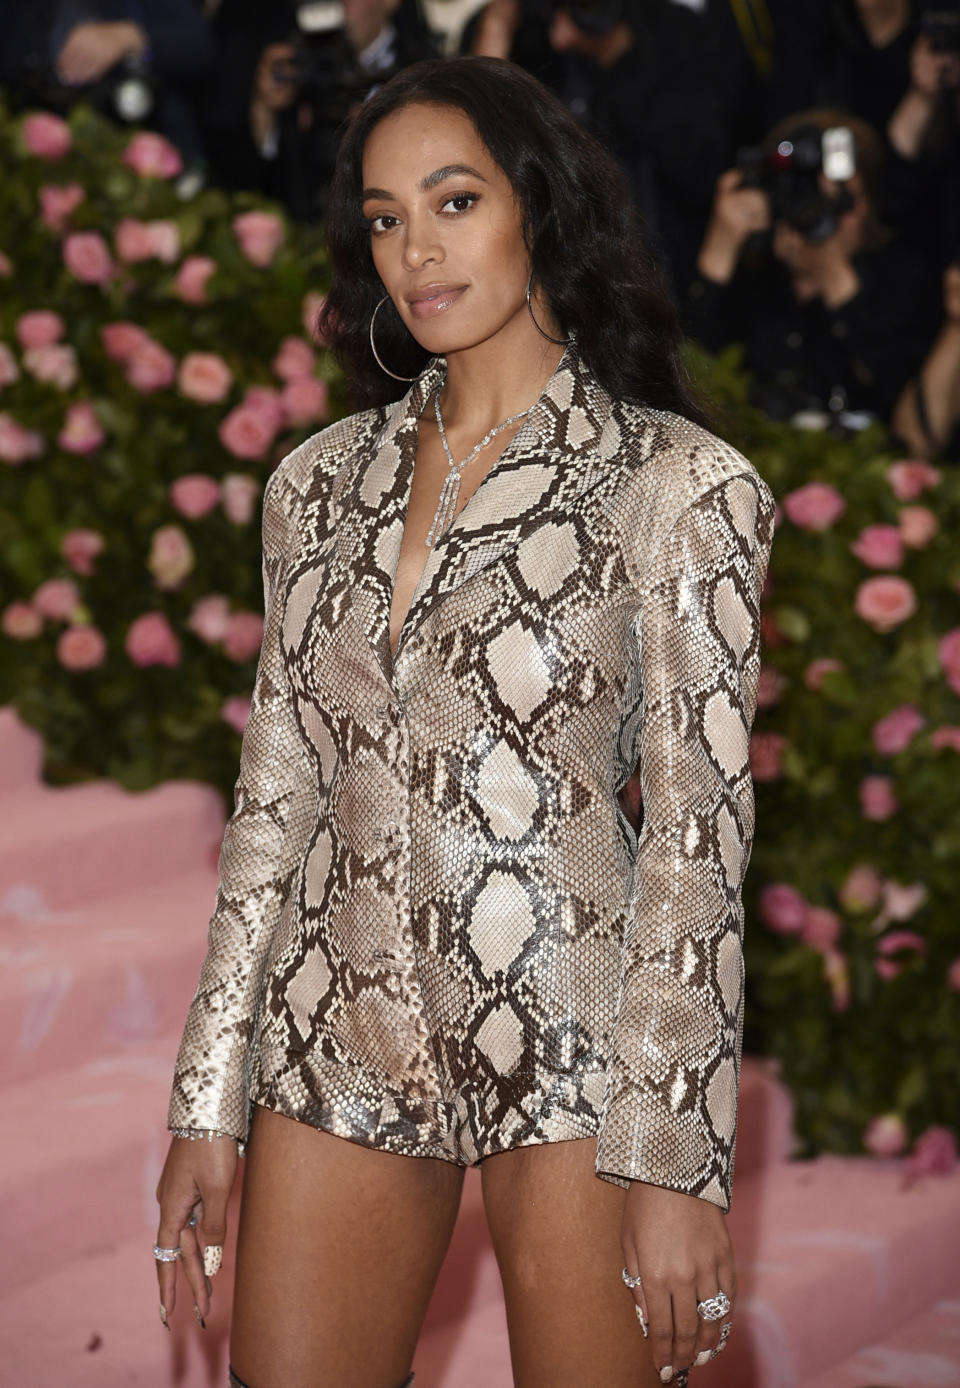 FILE - This May 6, 2019 file photo shows Solange Knowles at The Metropolitan Museum of Art's Costume Institute benefit gala in New York. Knowles will be the first recipient of the Lena Horne Prize, to be awarded in a ceremony at New York’s Town Hall on Feb. 28. (Photo by Evan Agostini/Invision/AP, File)